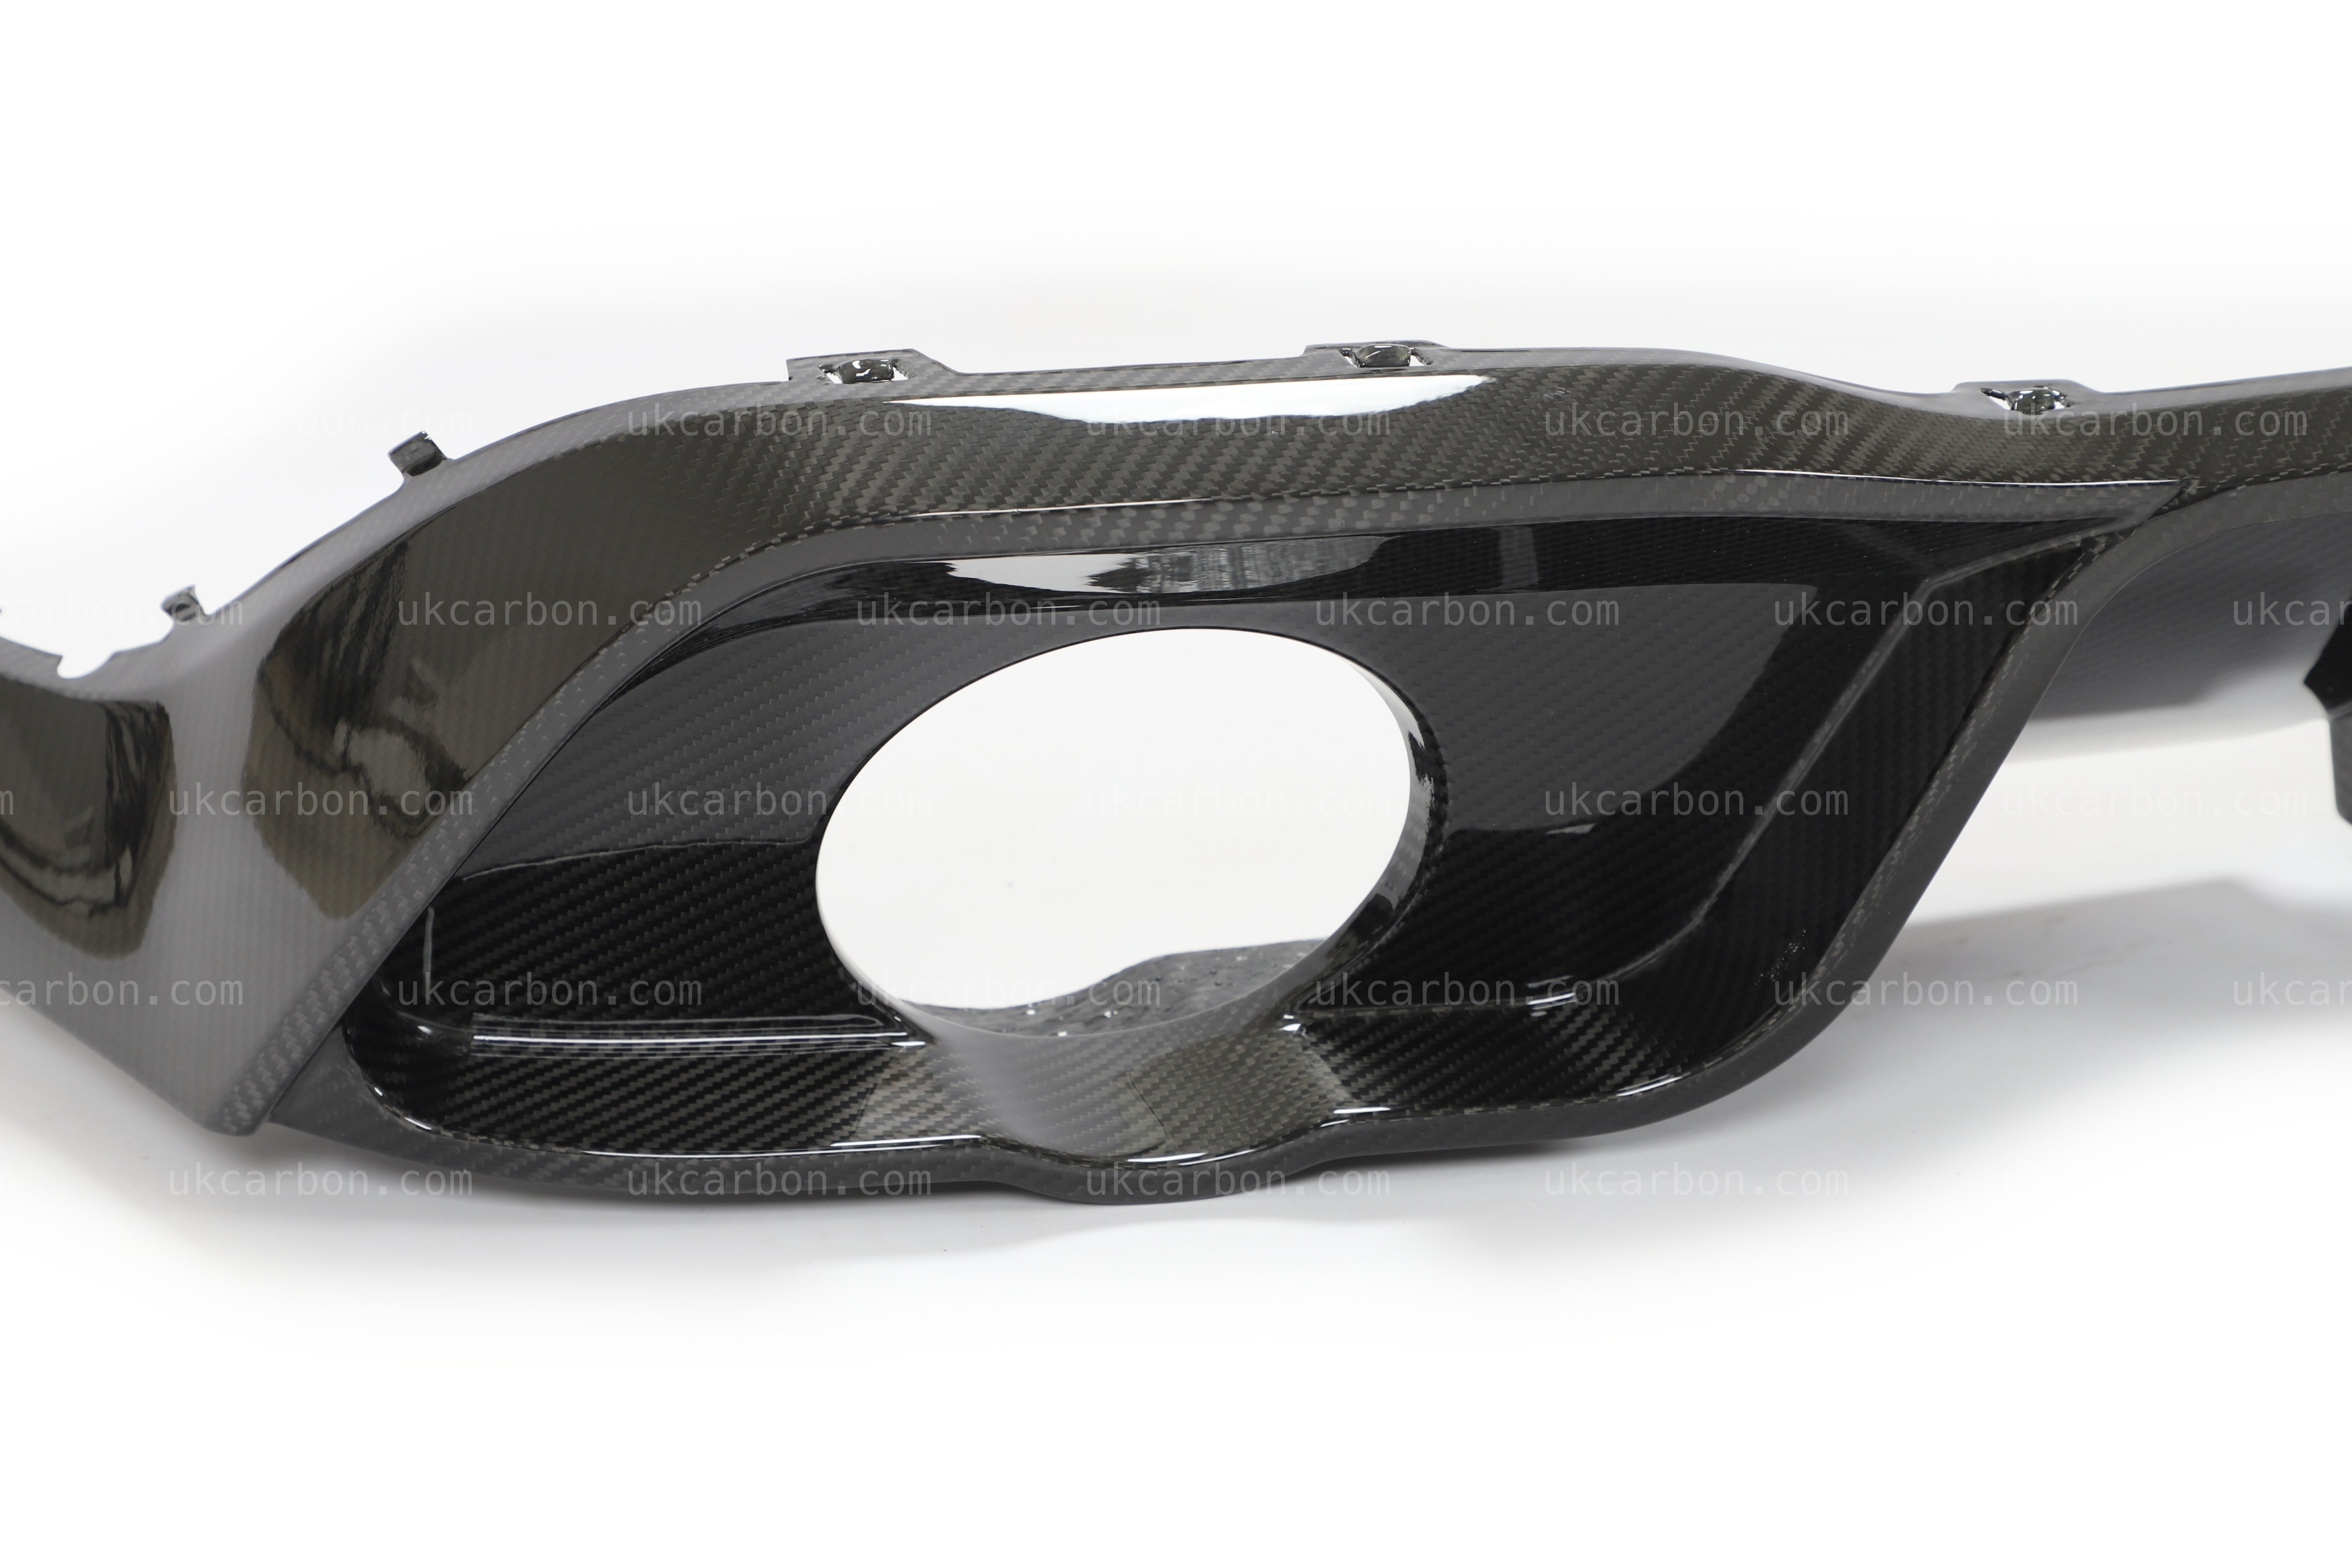 Volkswagen Golf GTI Diffuser Carbon Fibre MK8 Clubsport Kit 2.0 by UKCarbon